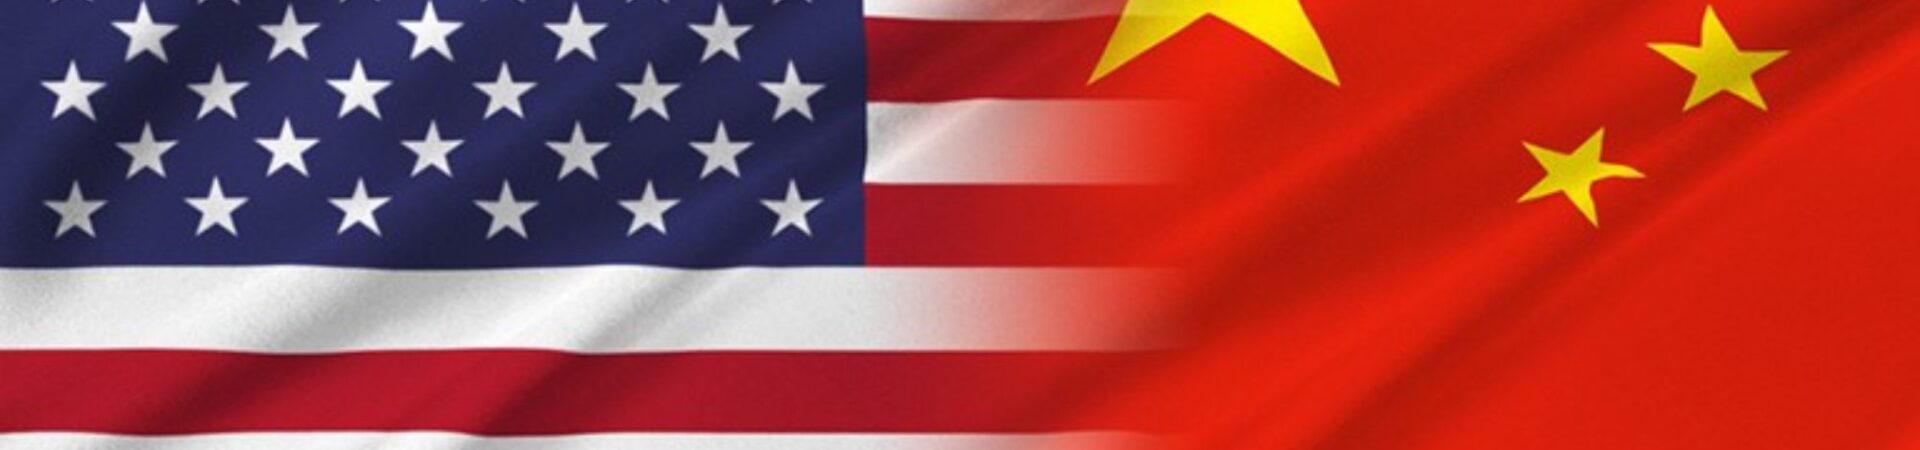 US may take action against Chinese tech sector